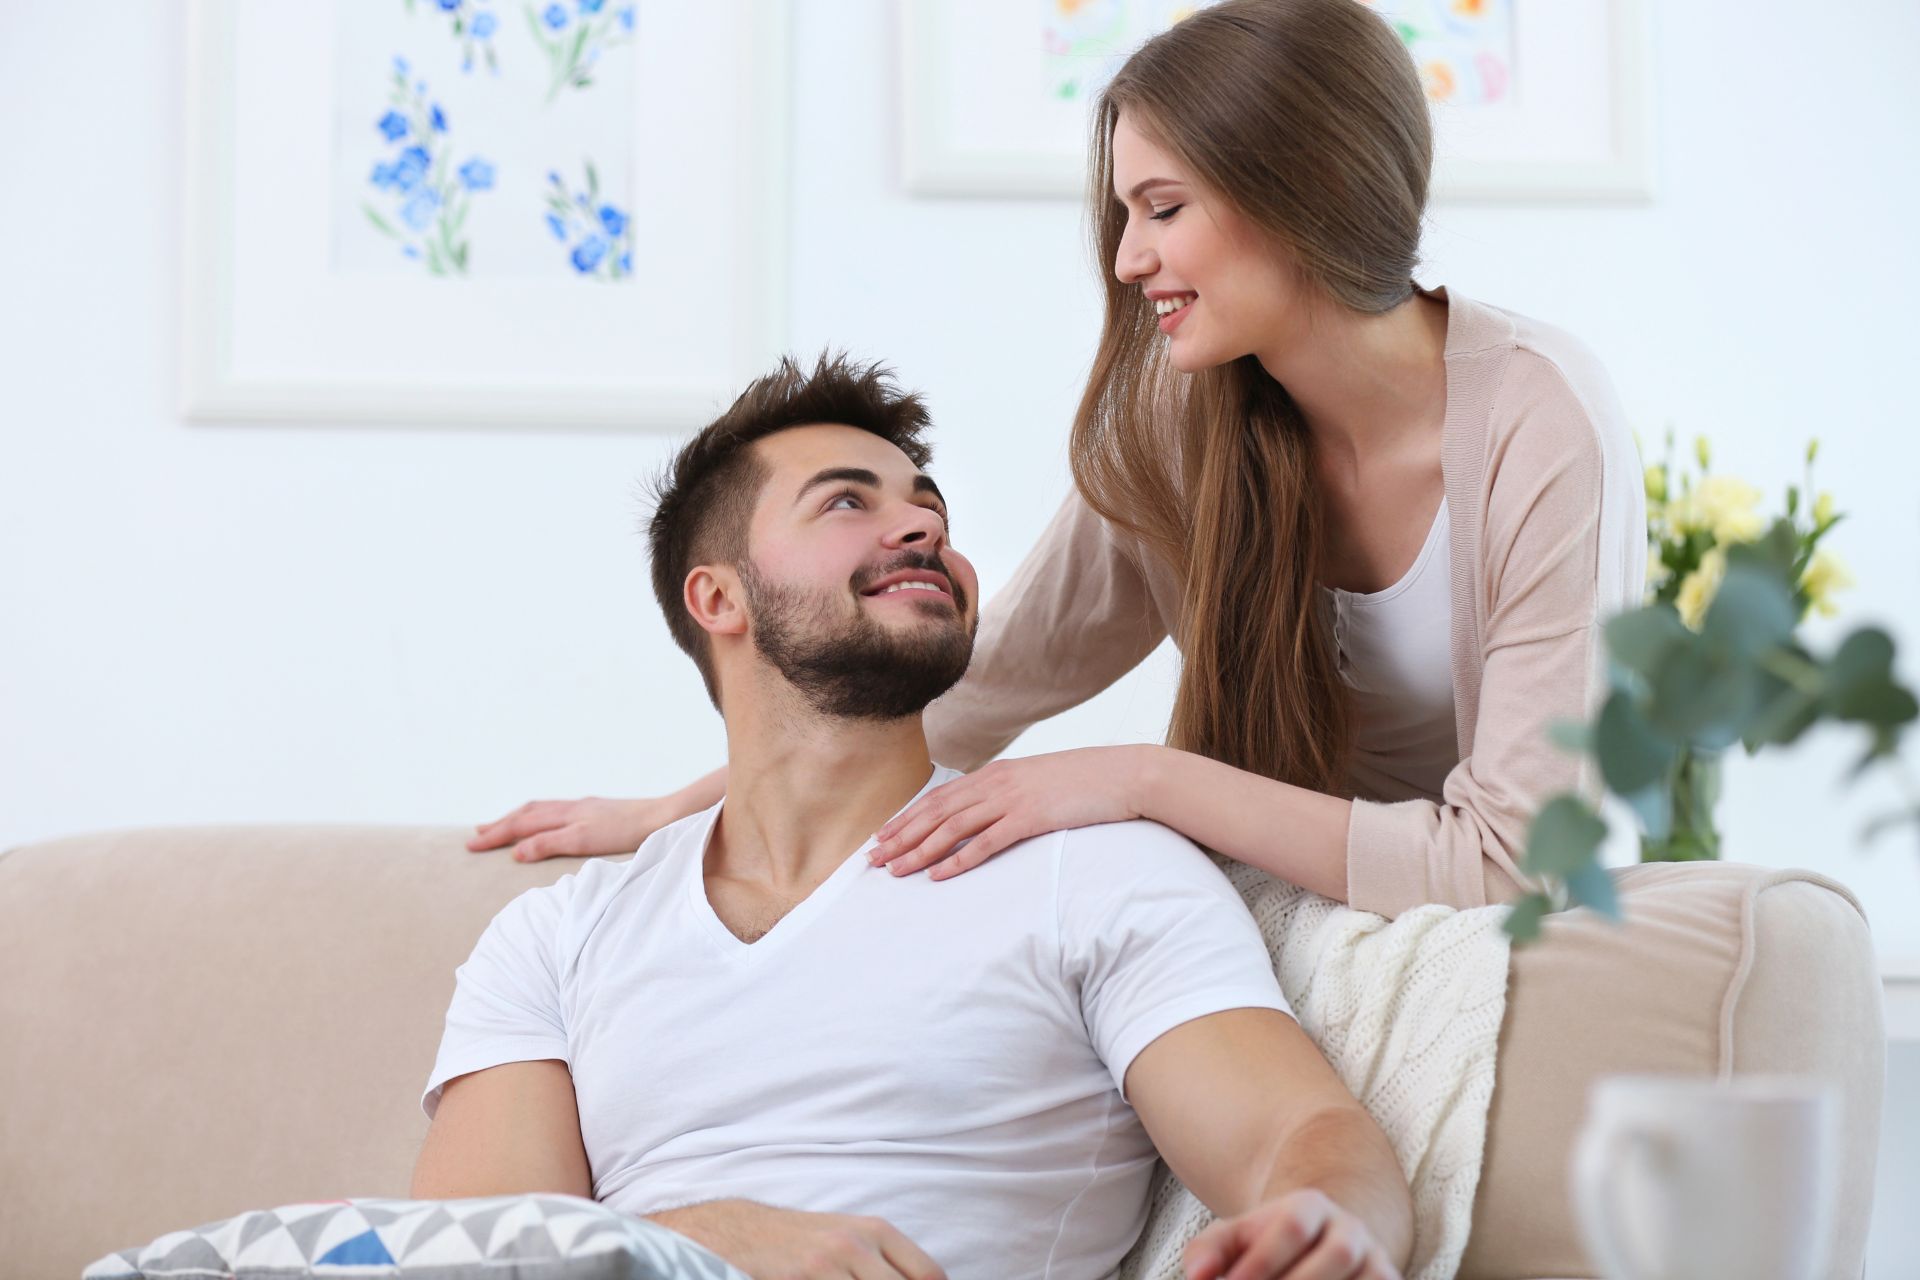 ways to make your partner feel special every day